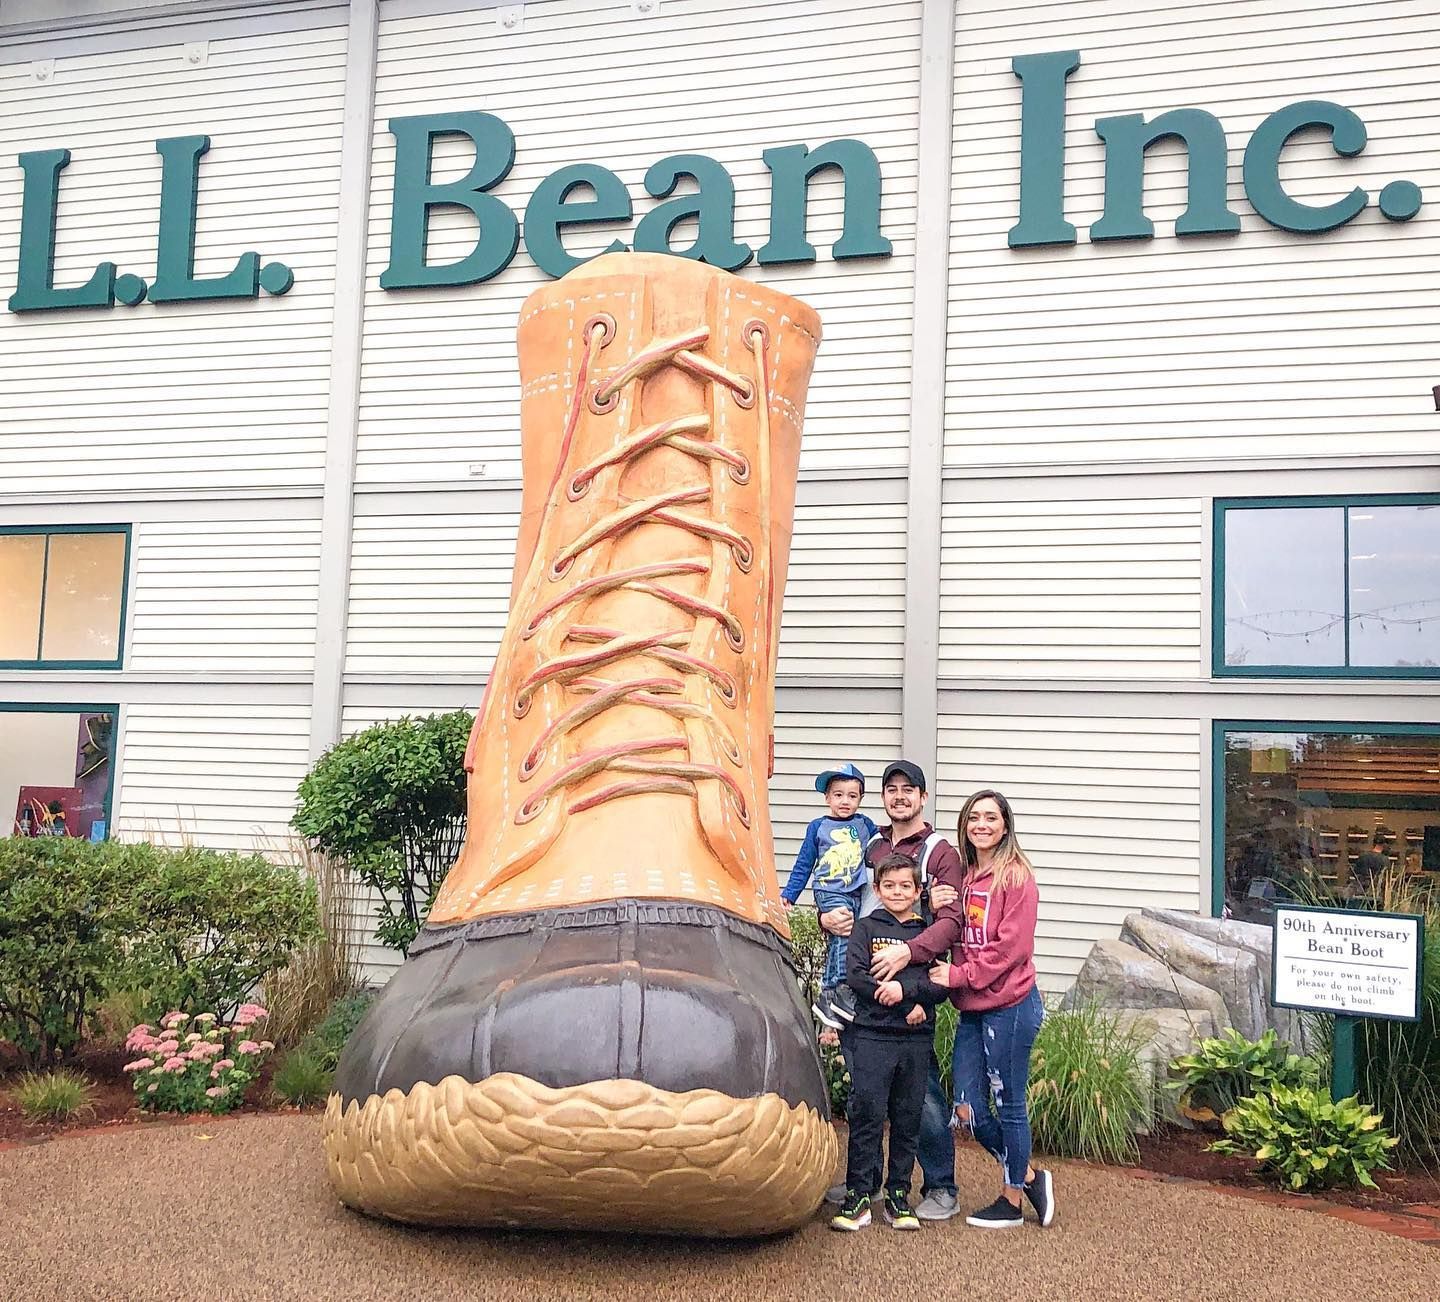 
World's Largest Hunting Boot, world record in Freeport, Maine